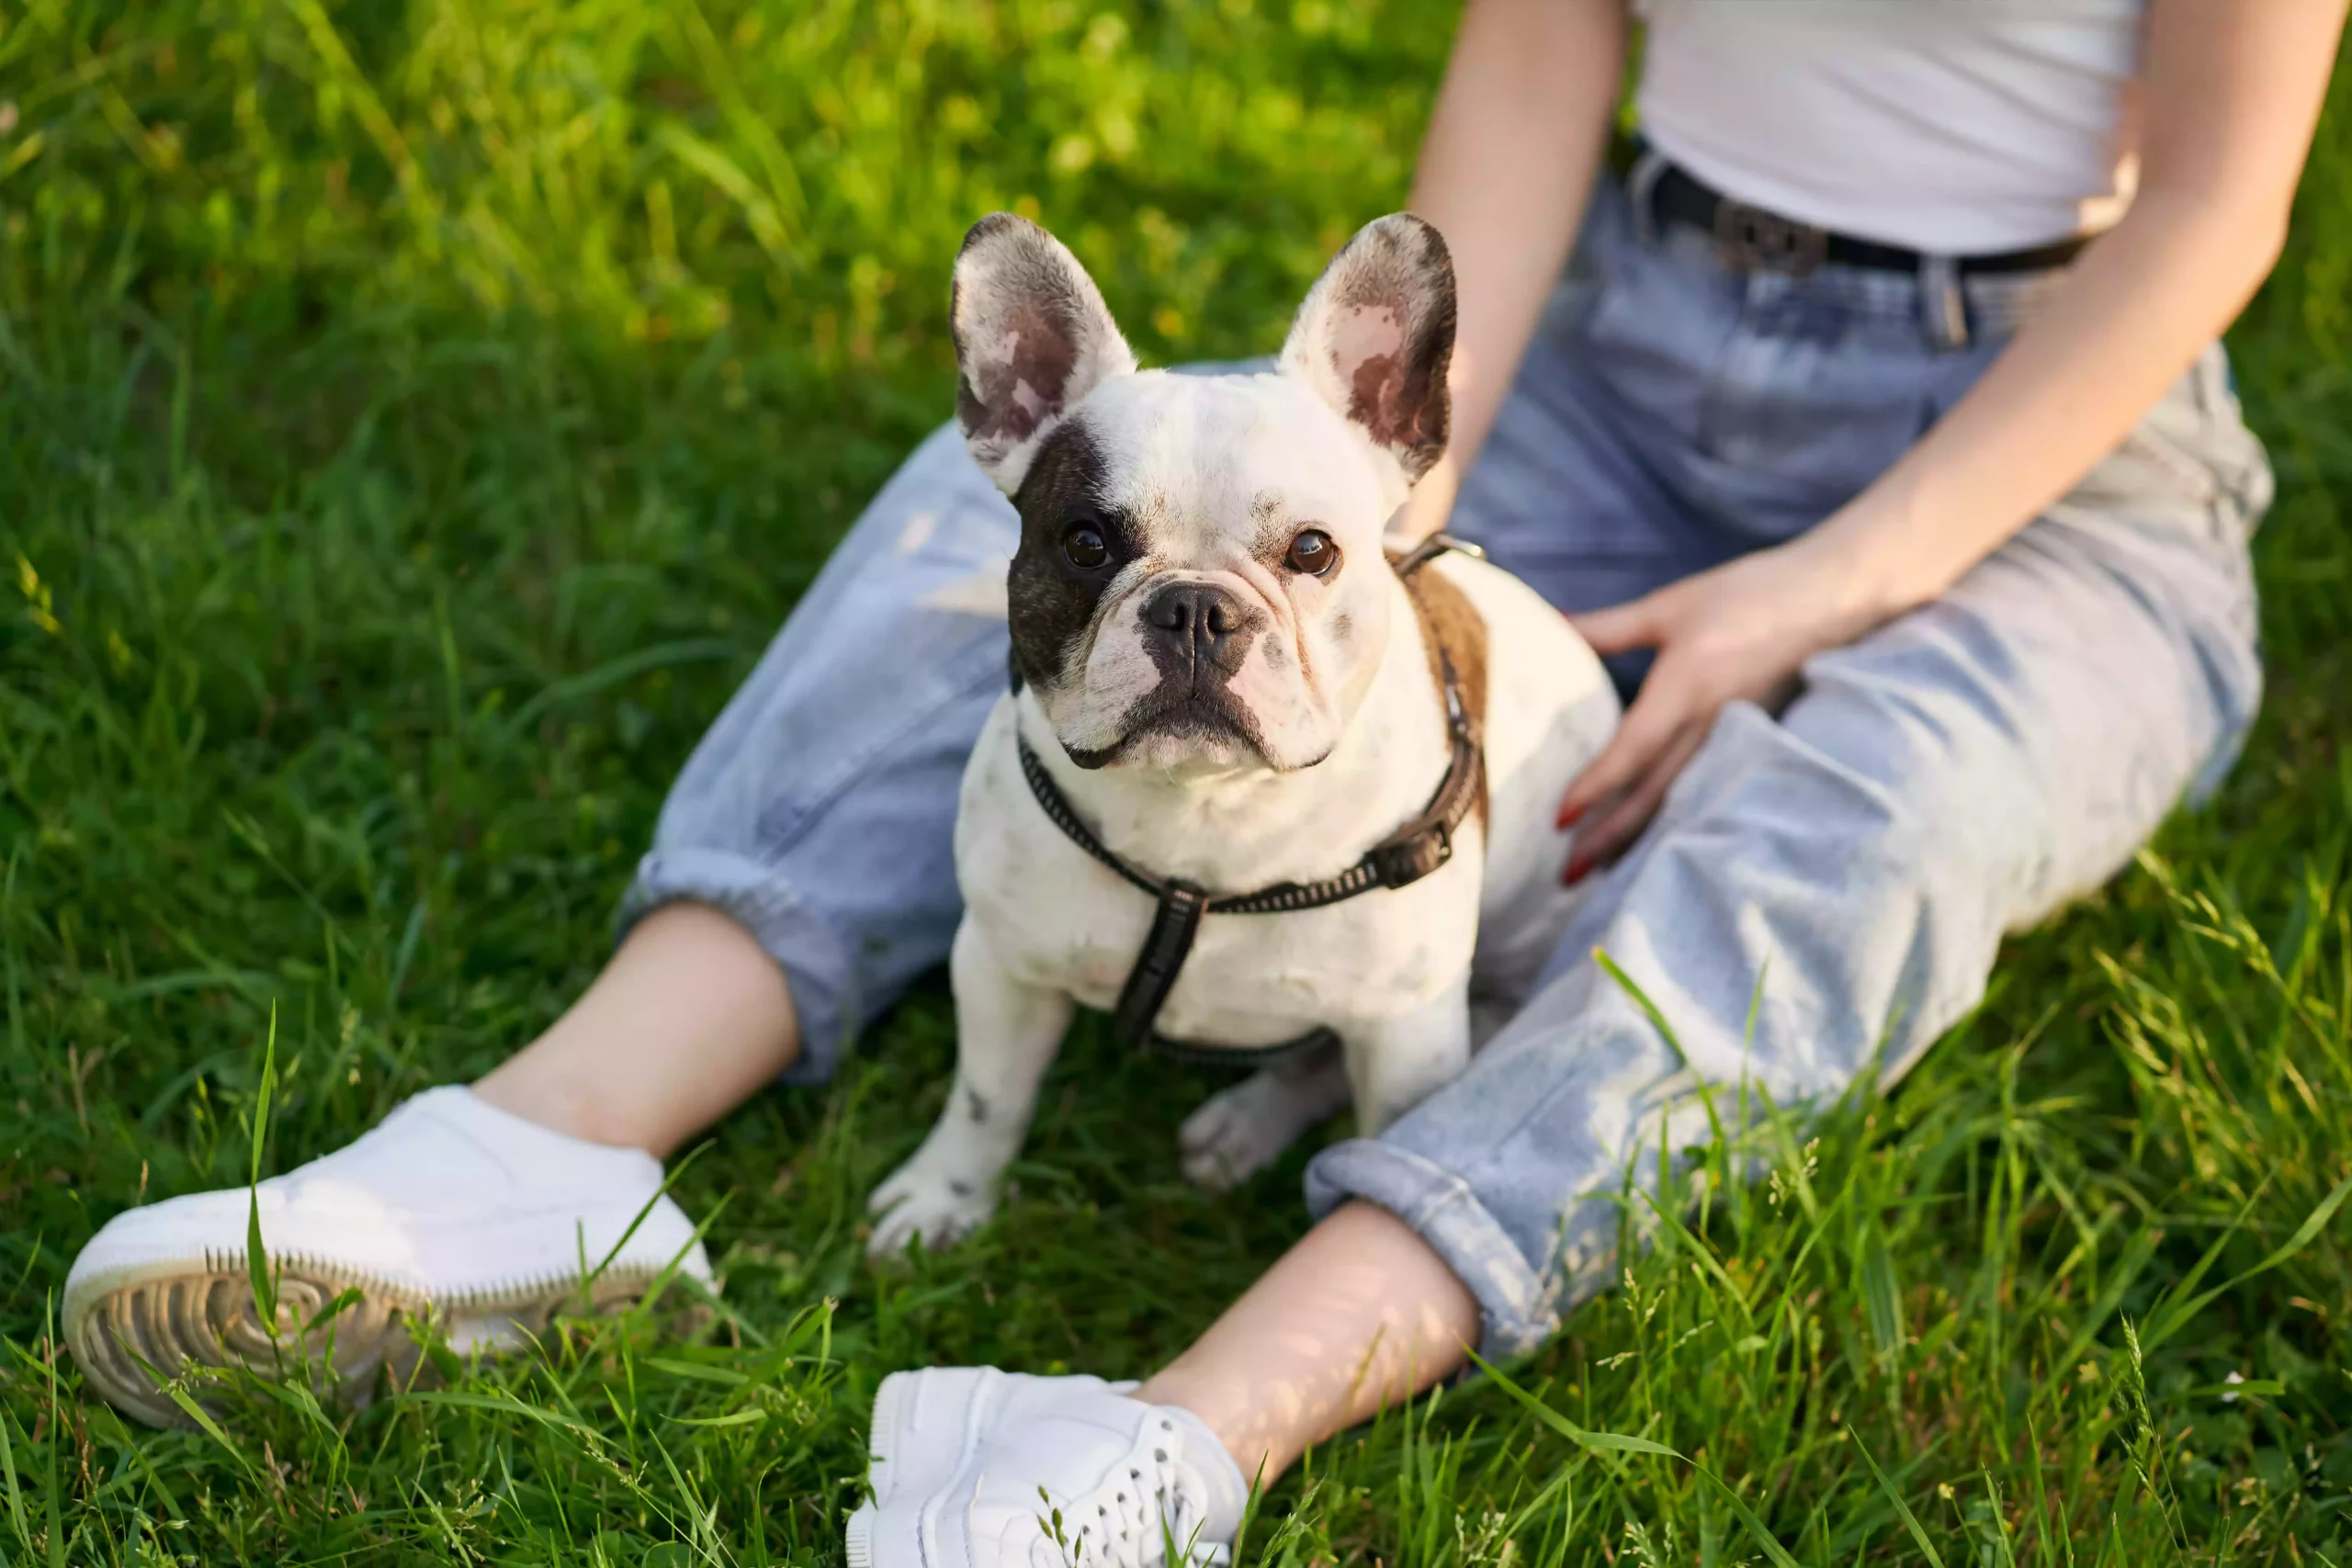 French bulldog enjoying time with owner in the park